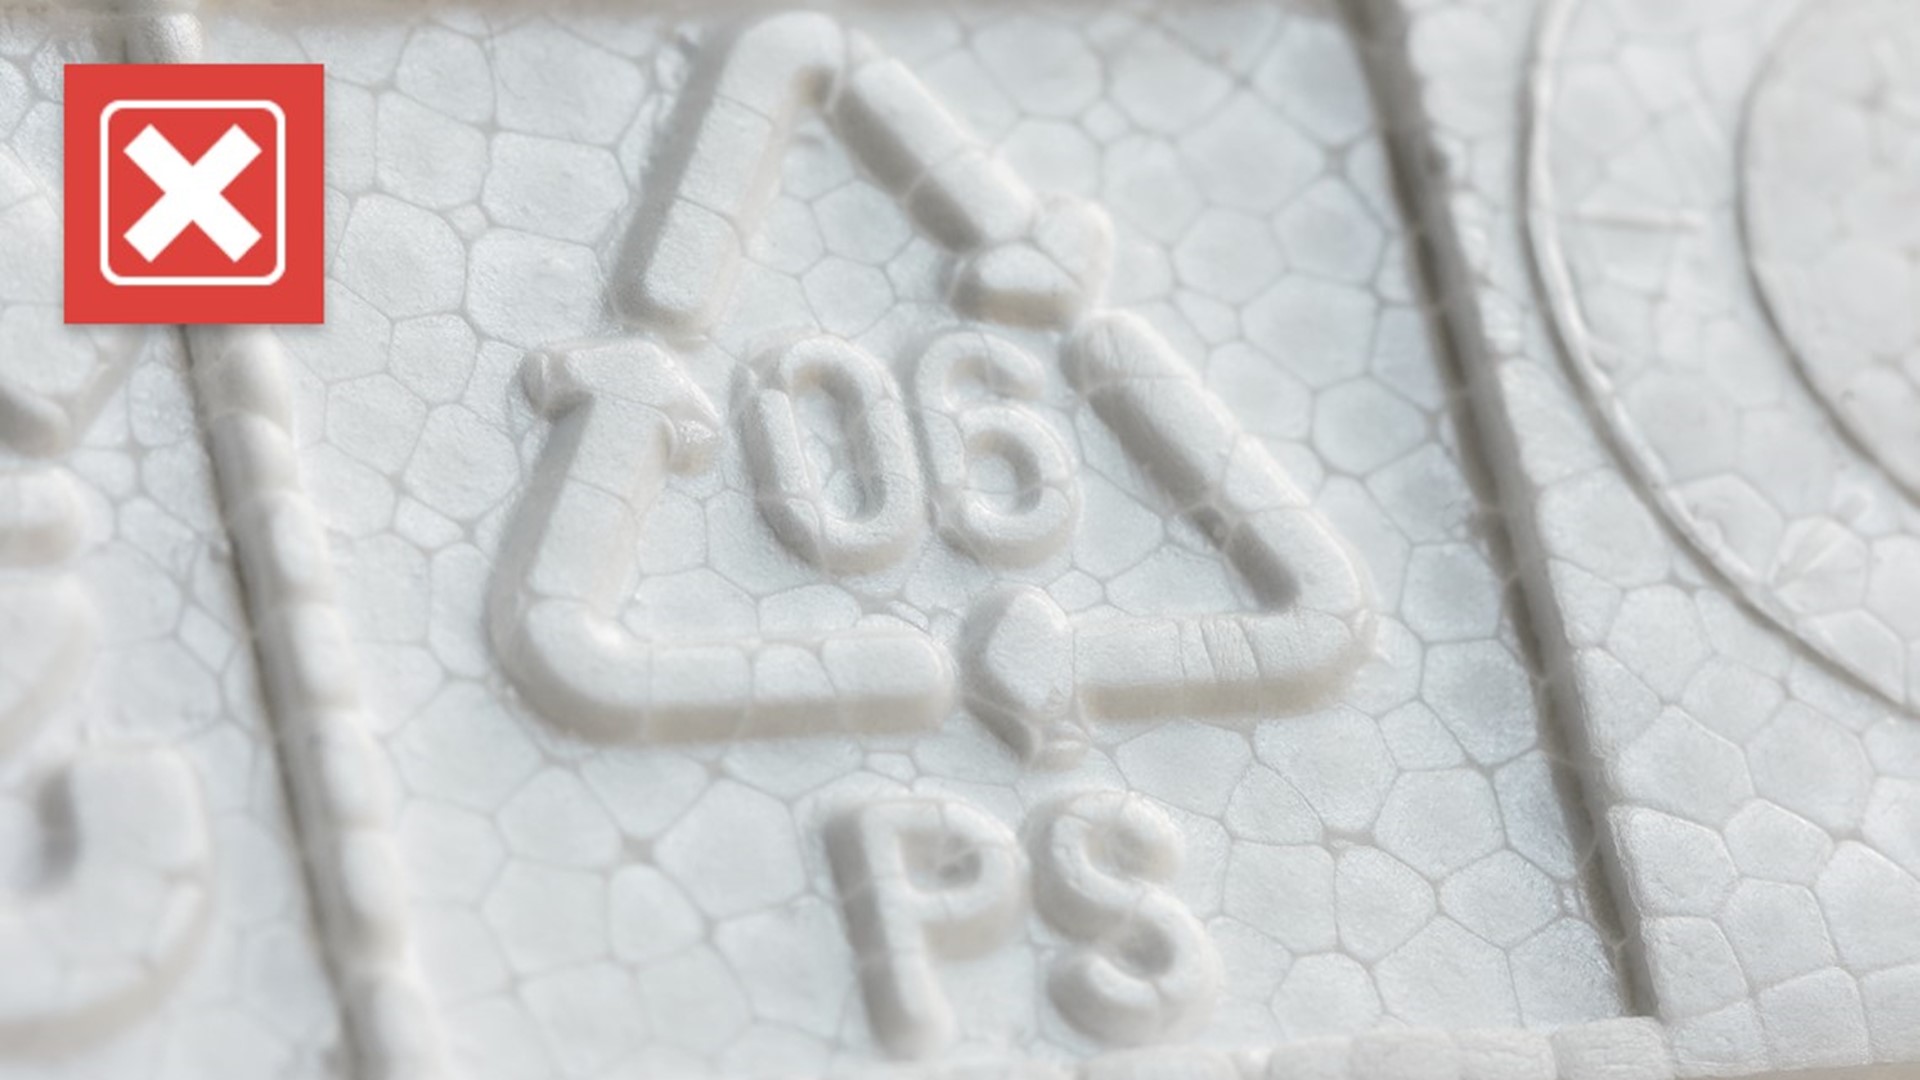 There are a total of seven resin codes and each number signifies a different category of plastics. But does that mean they can all be recycled?